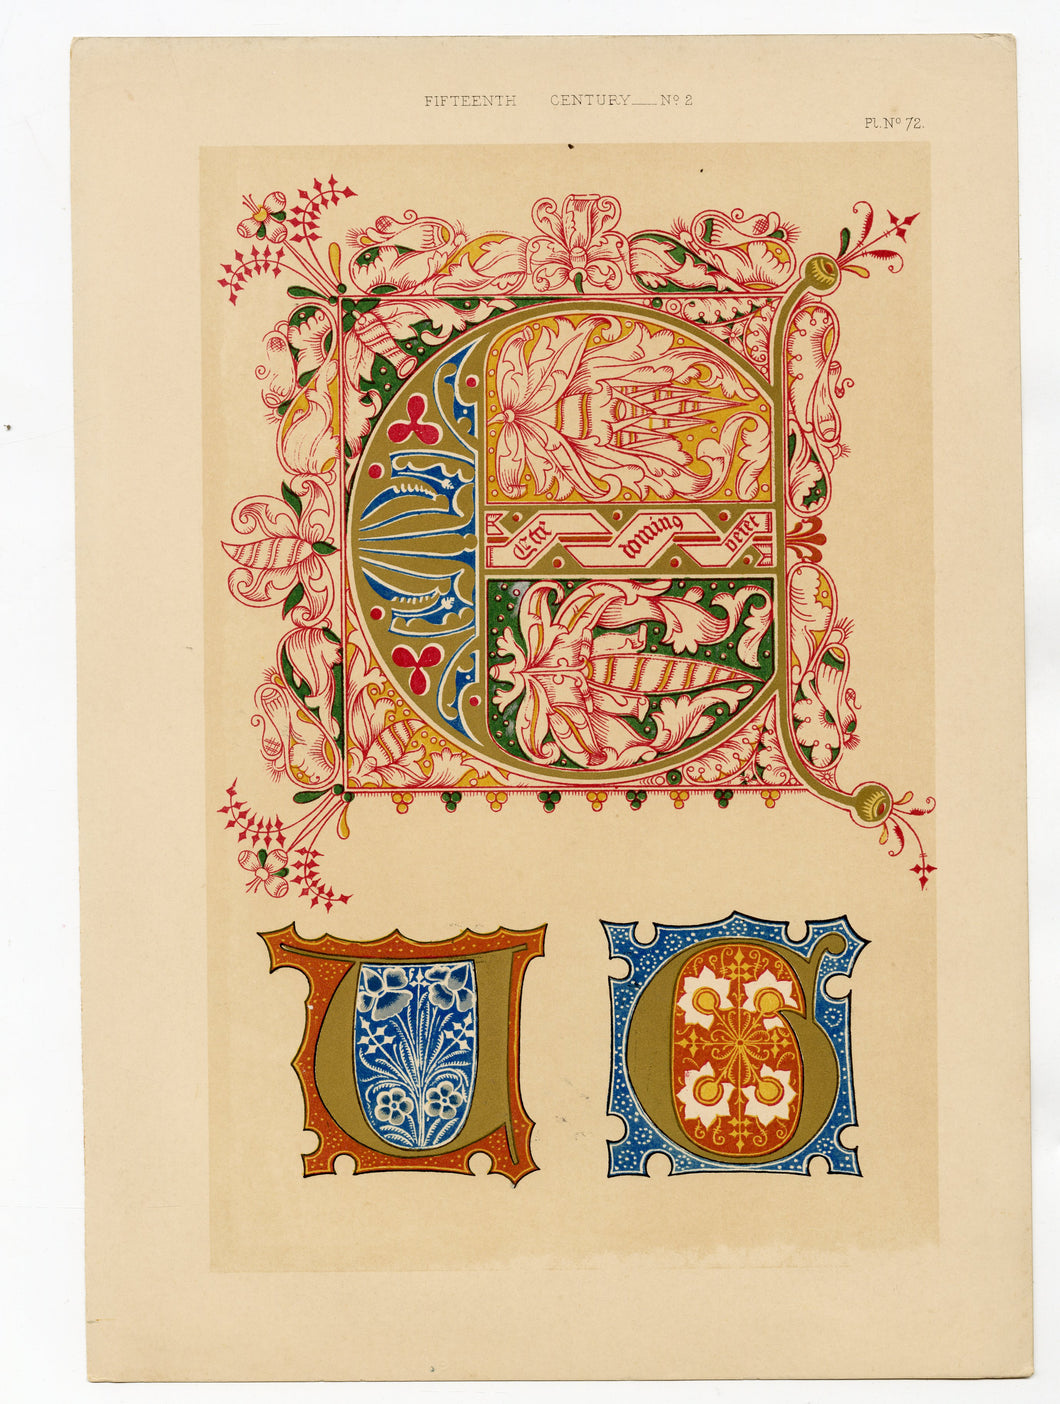 Beautiful Chromolithograph Book Plate Illuminated Letters About 150 Years Old - Plate Number 72